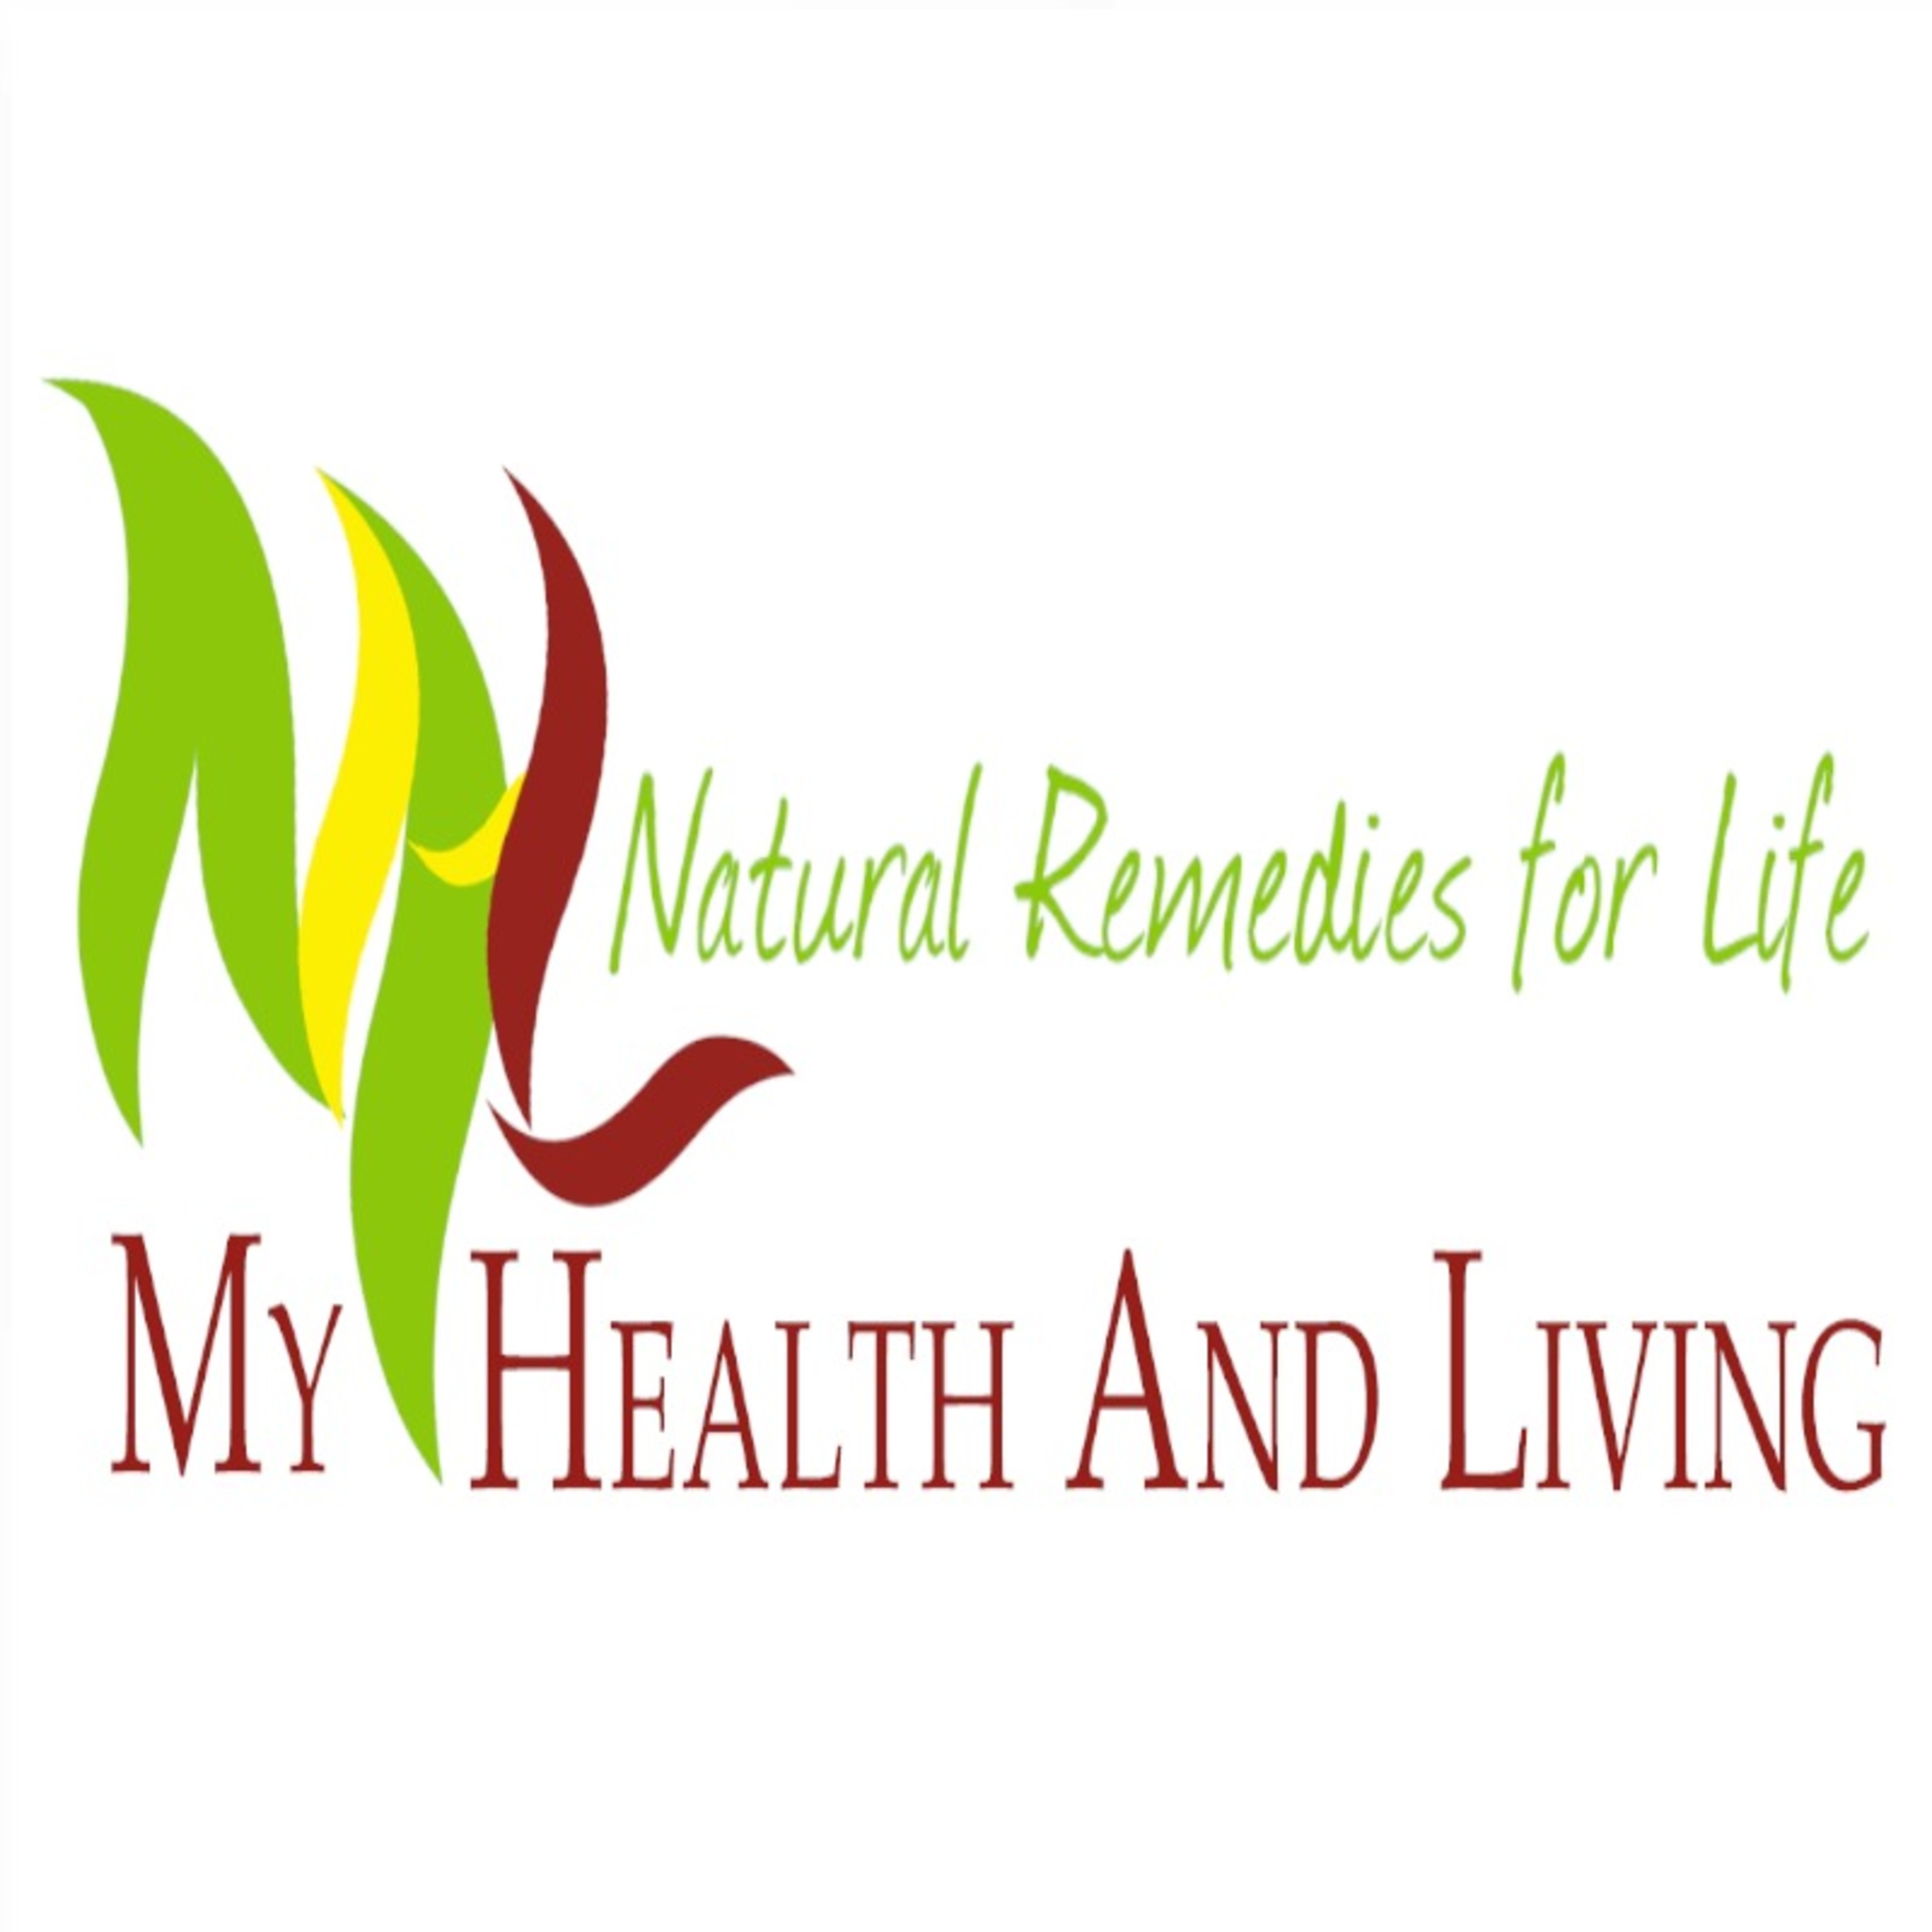 My Health and Living with Natural Remedies for Life